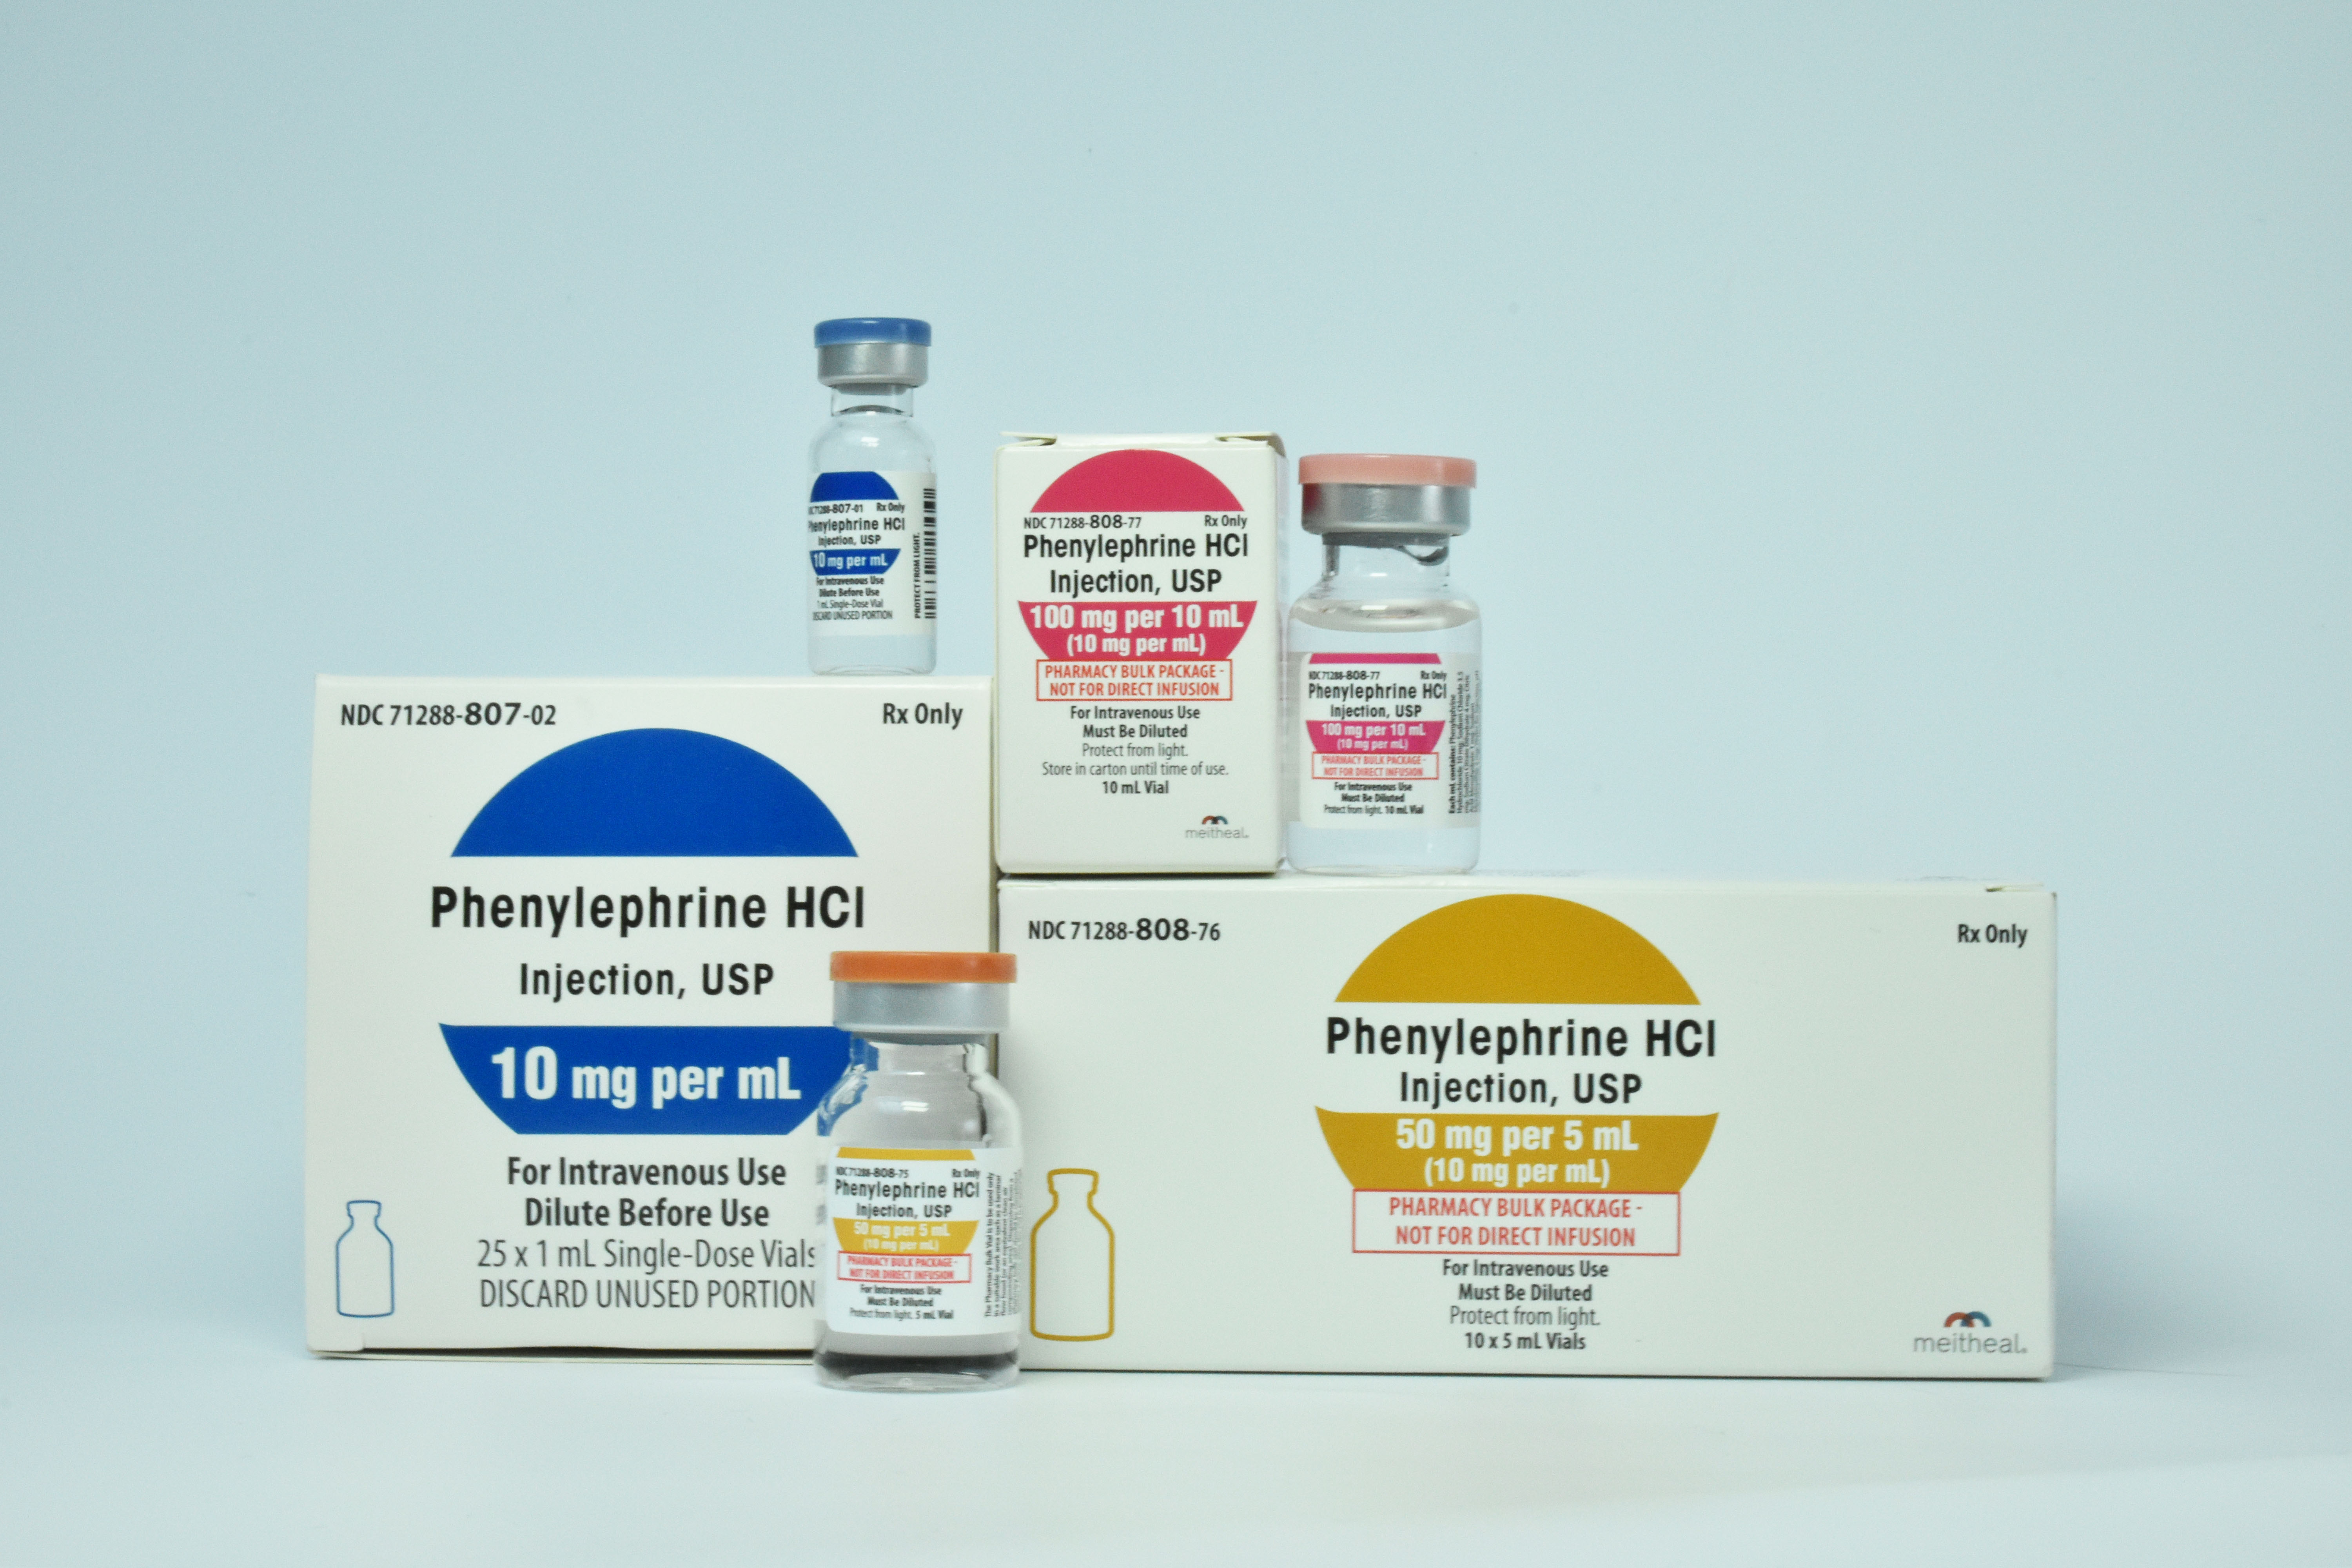 Phenylephrine HCl Injection